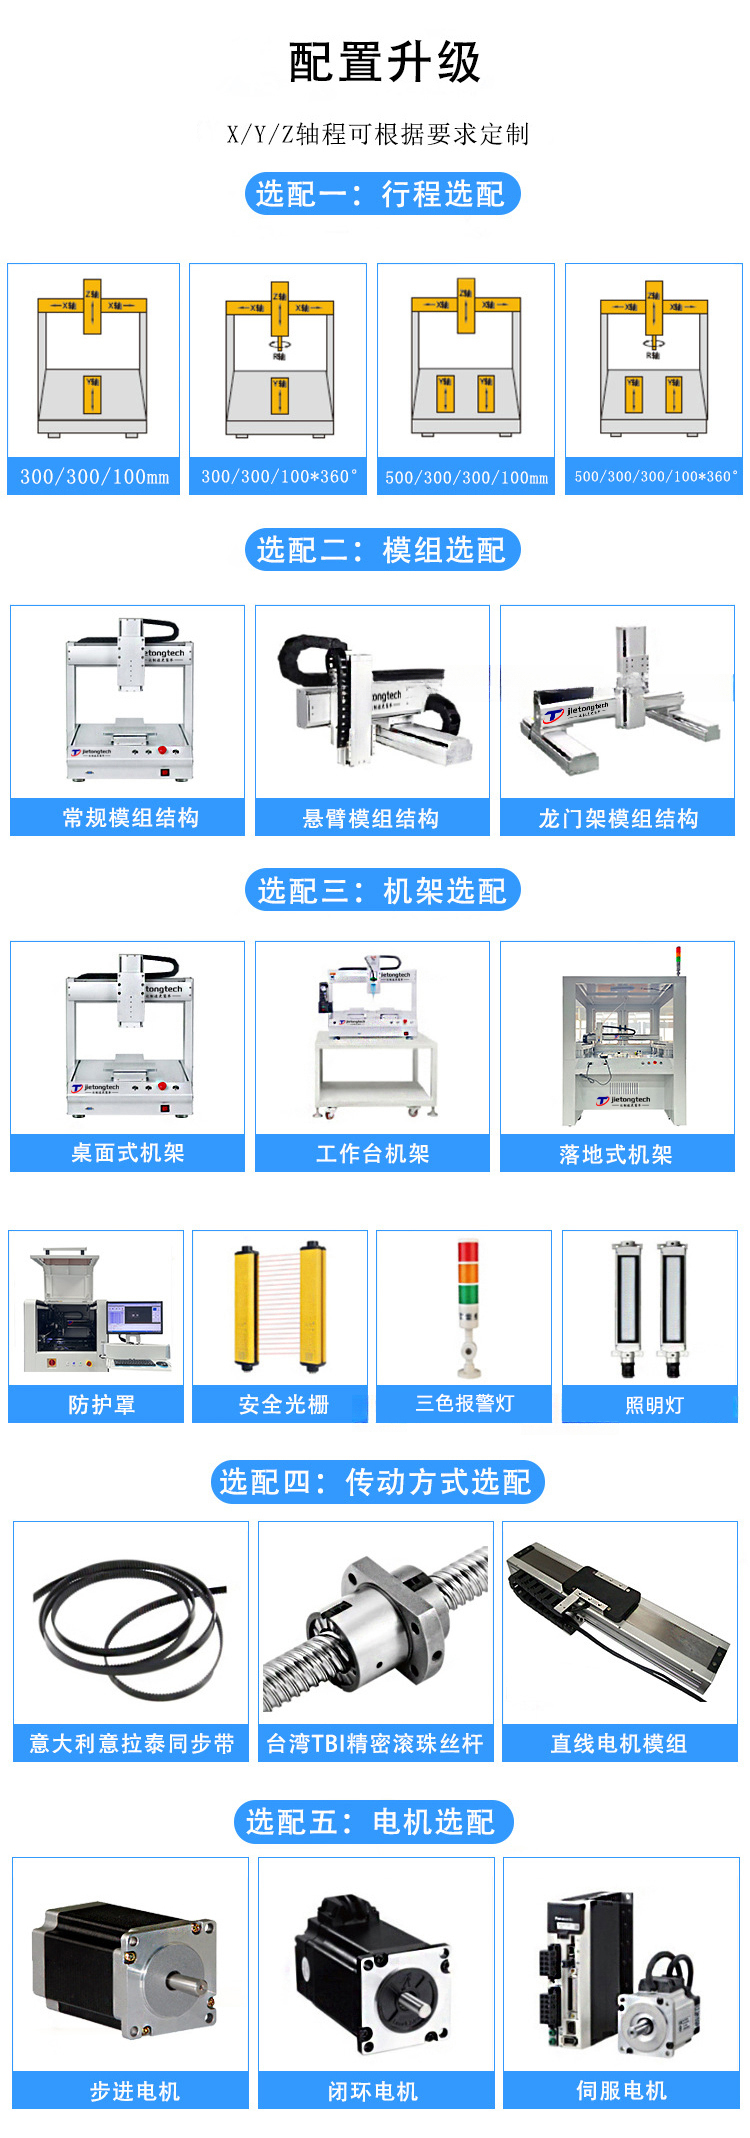 Double head and dual station automatic soldering machine PCB board electronic connector spot welding electronic component needle soldering soldering machine